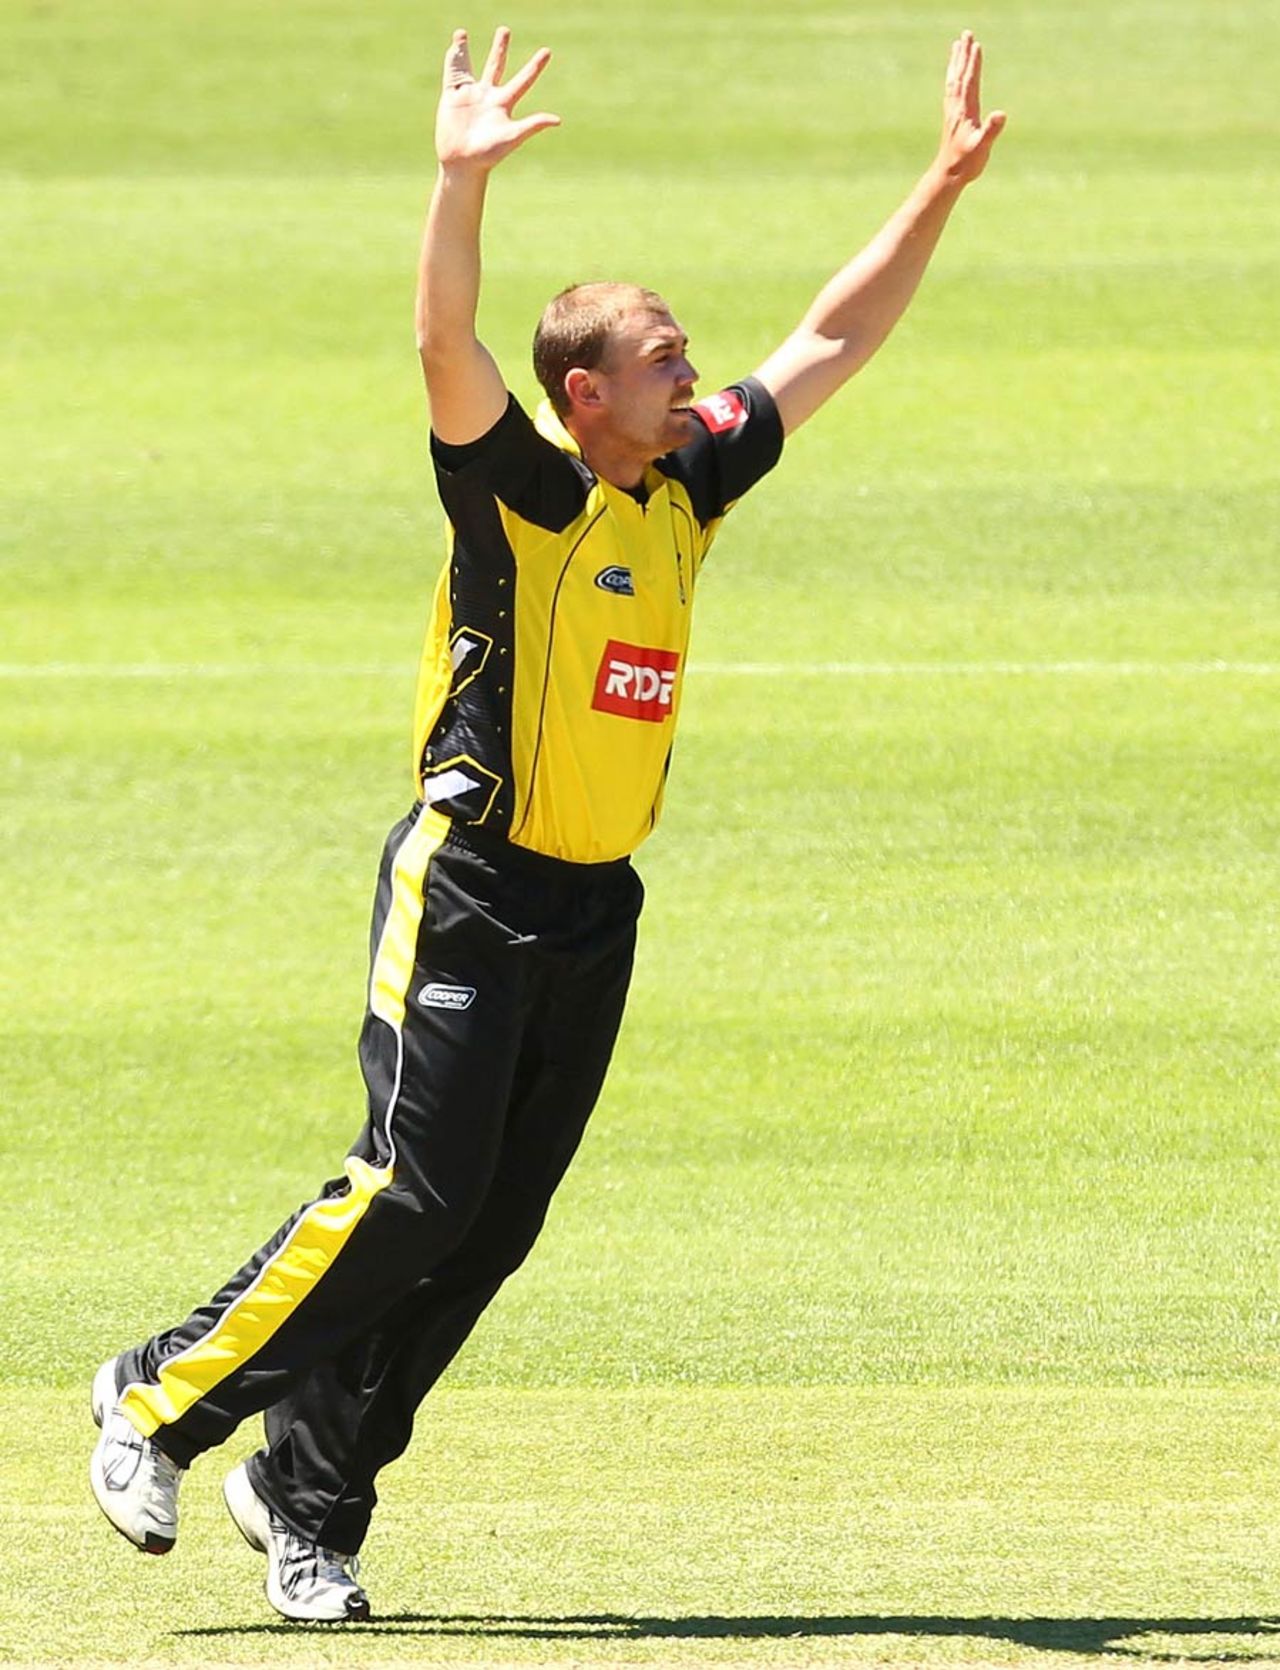 Ryan Duffield appeals for a wicket, New South Wales v Western Australia, Ryobi Cup, Hurstville Oval, Sydney, October 17, 2010